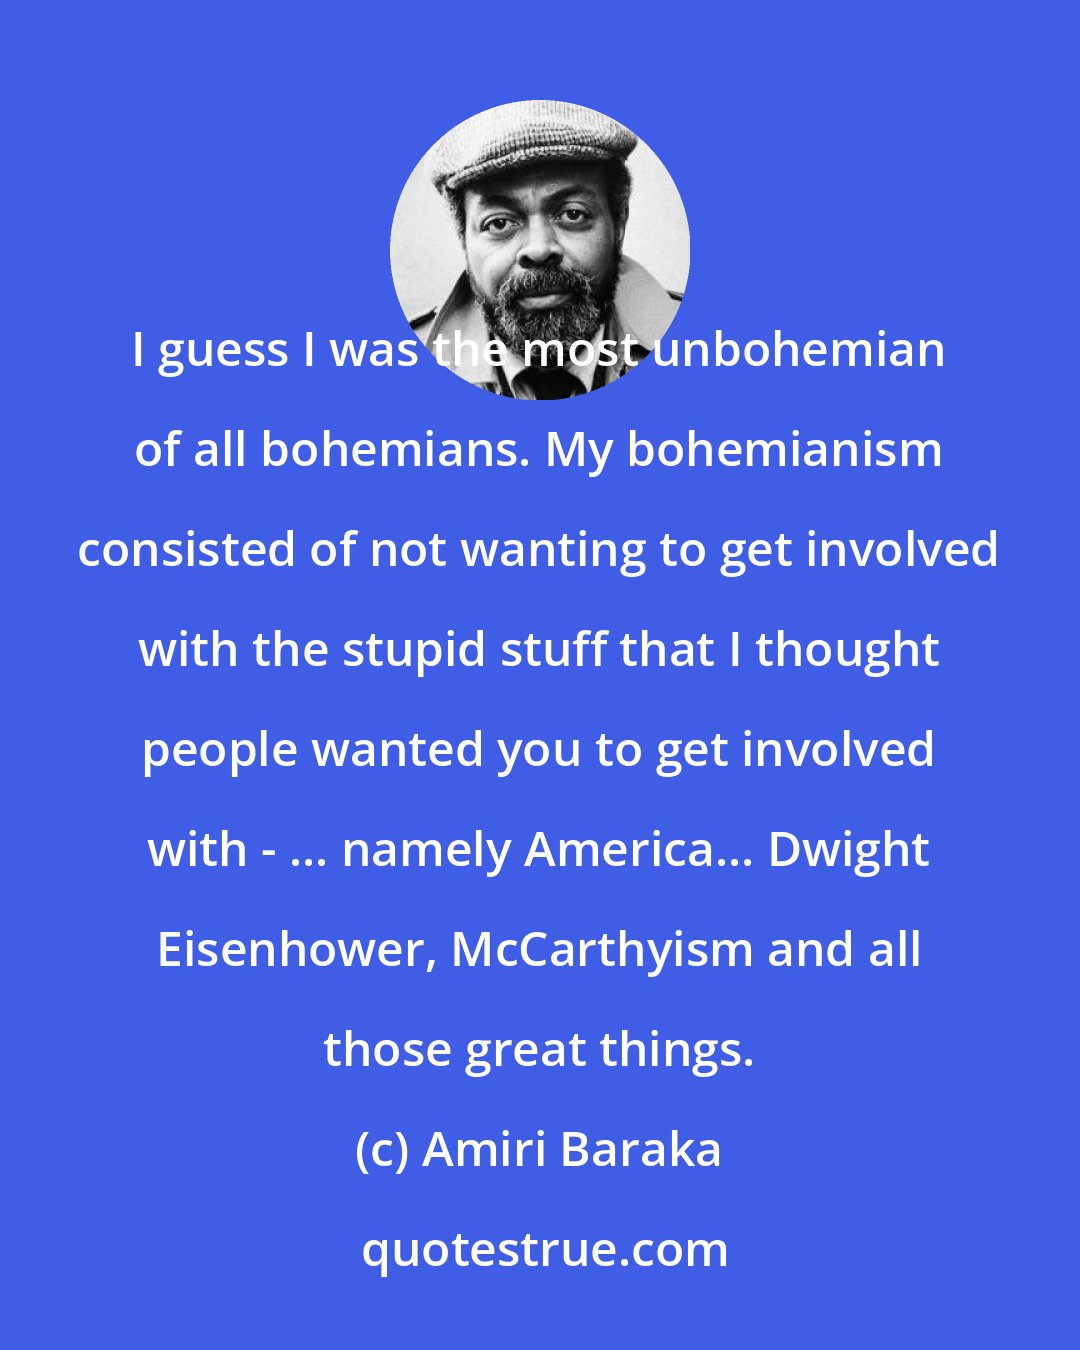 Amiri Baraka: I guess I was the most unbohemian of all bohemians. My bohemianism consisted of not wanting to get involved with the stupid stuff that I thought people wanted you to get involved with - ... namely America... Dwight Eisenhower, McCarthyism and all those great things.